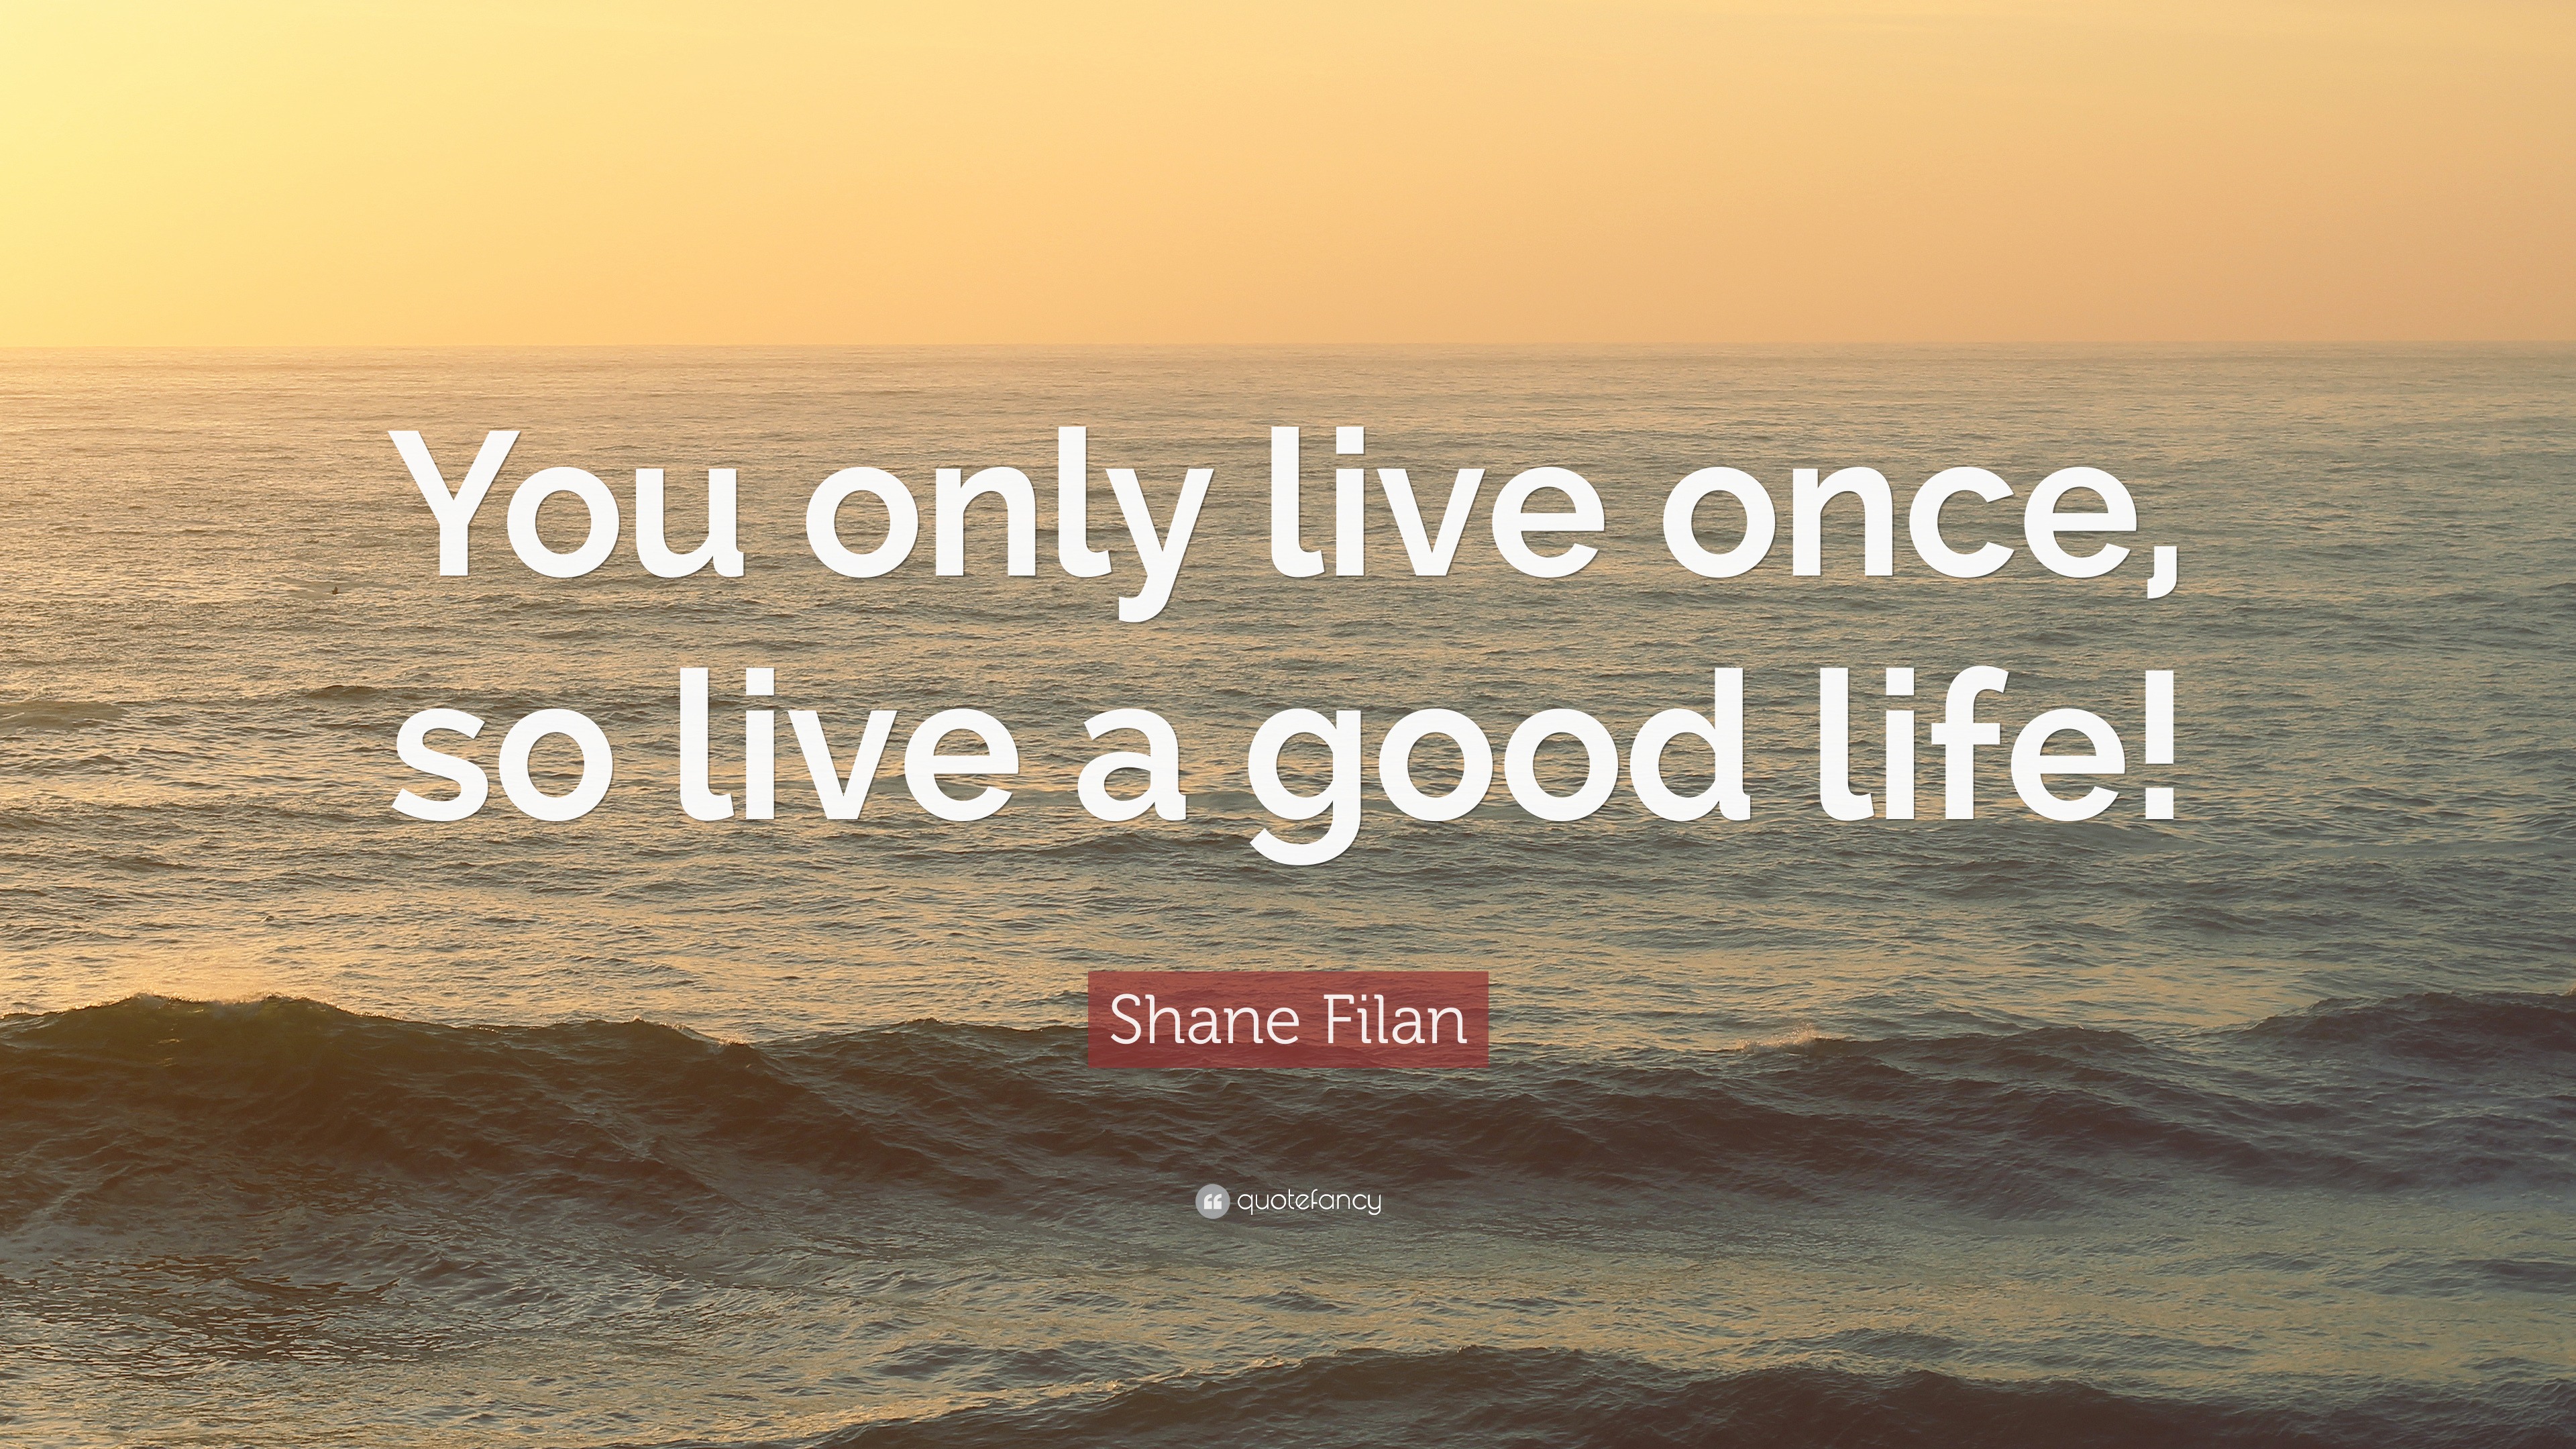 Shane Filan Quote: "You only live once, so live a good life!"